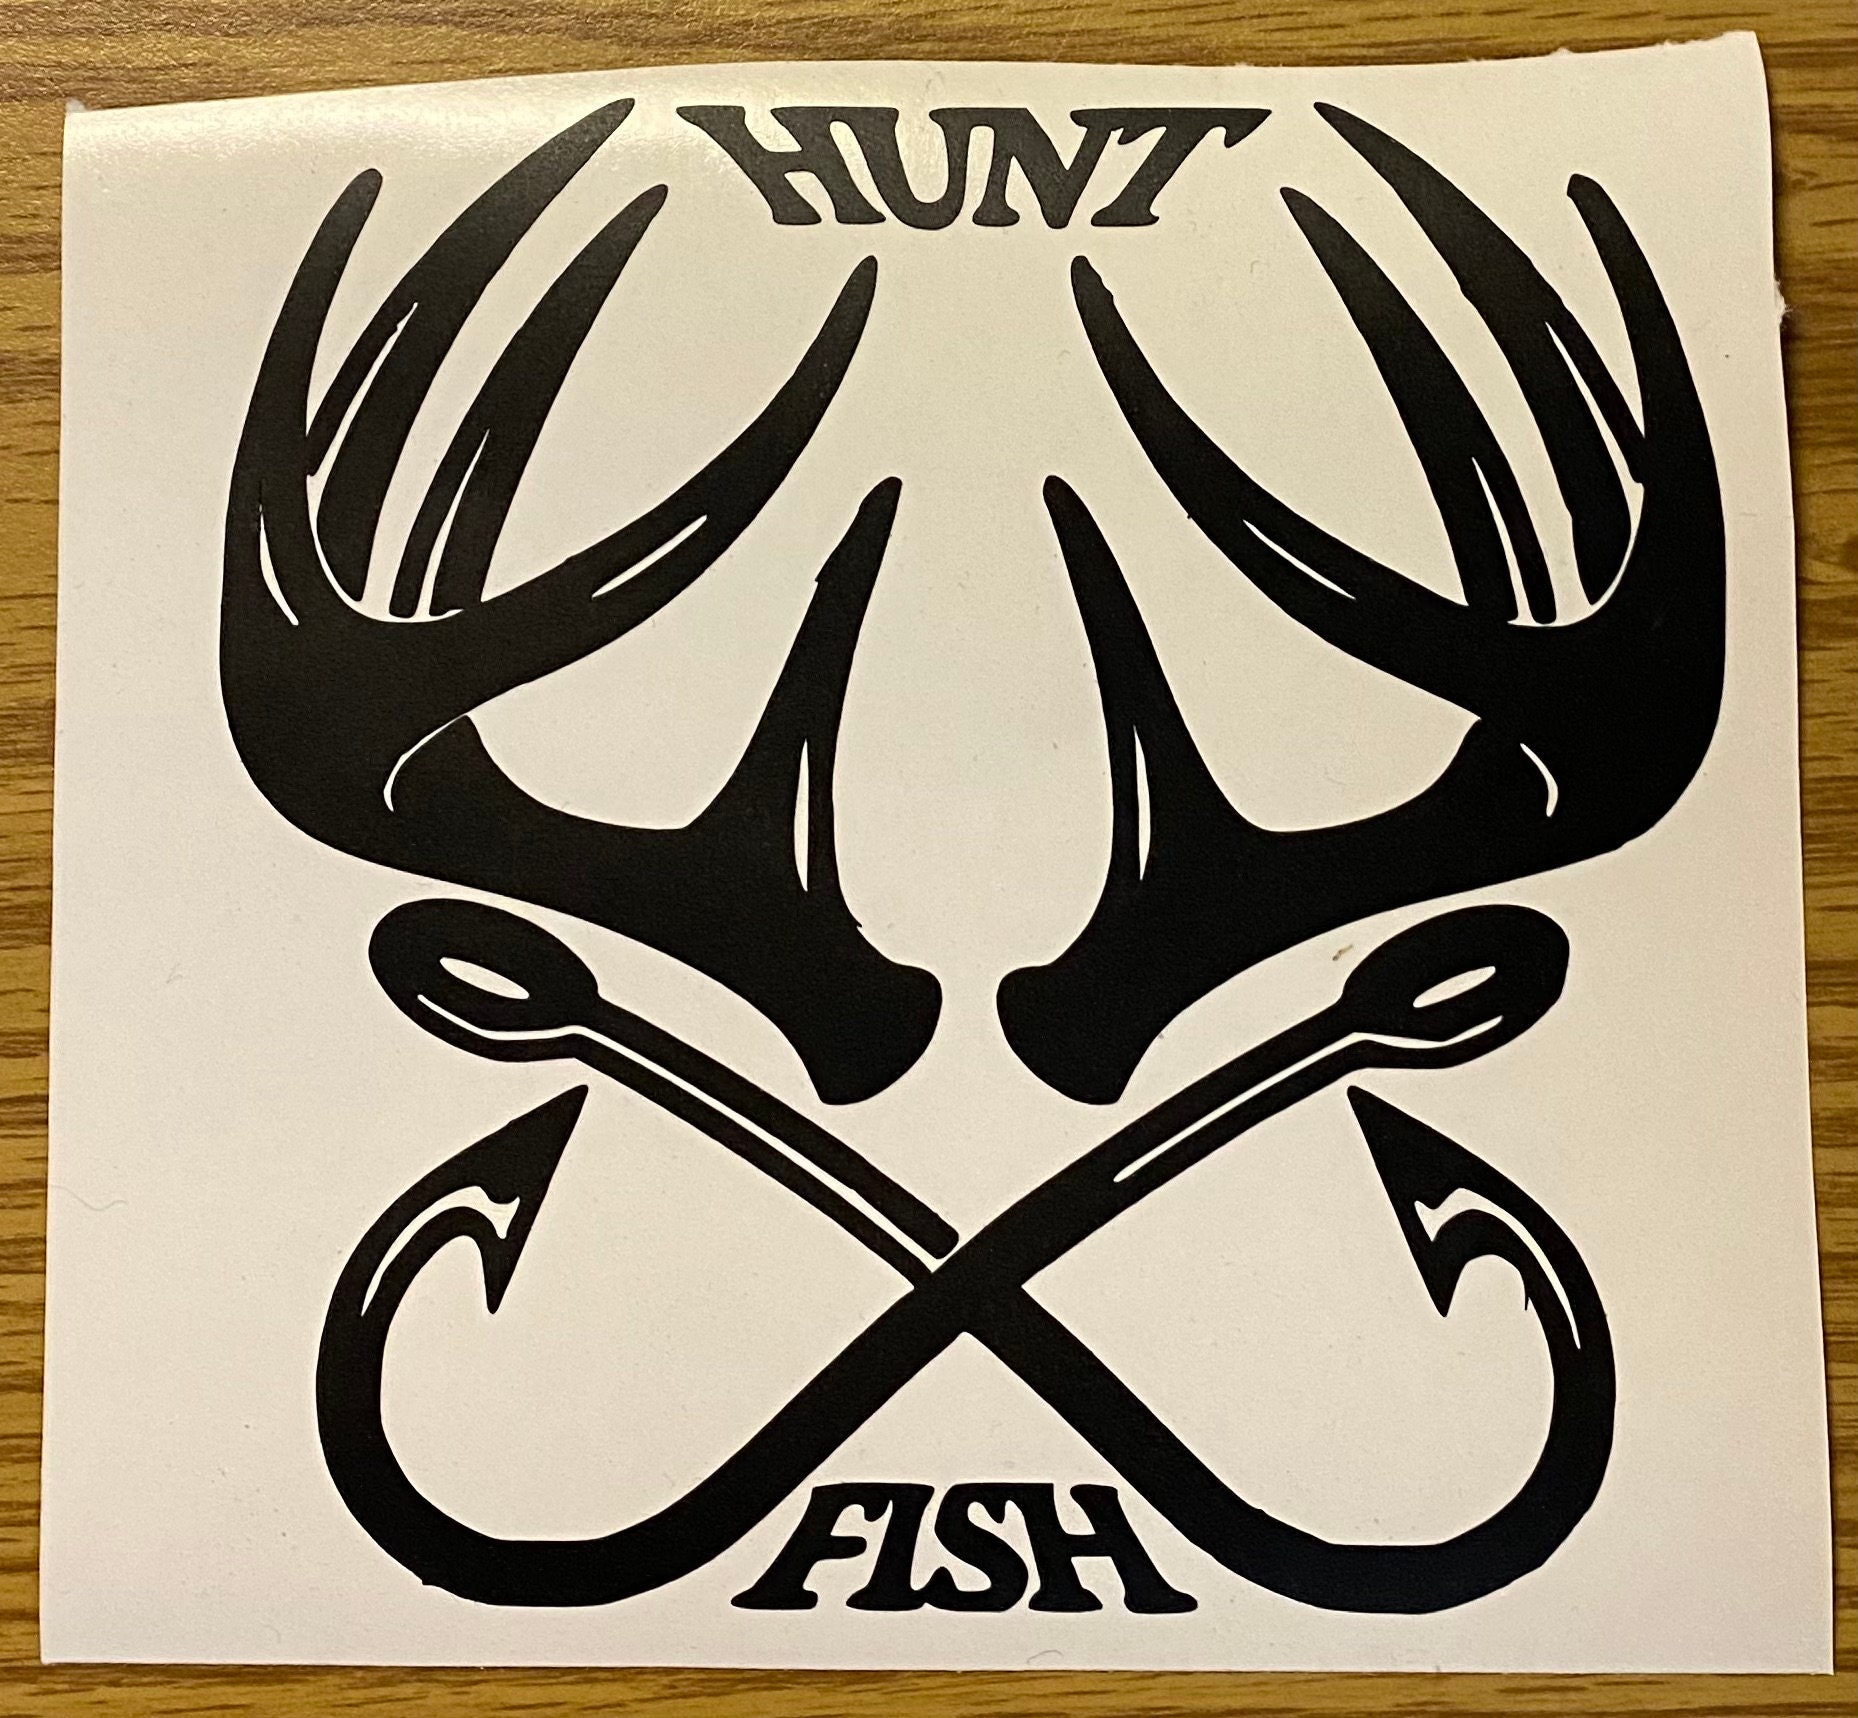 Hunting Face Decals Retail